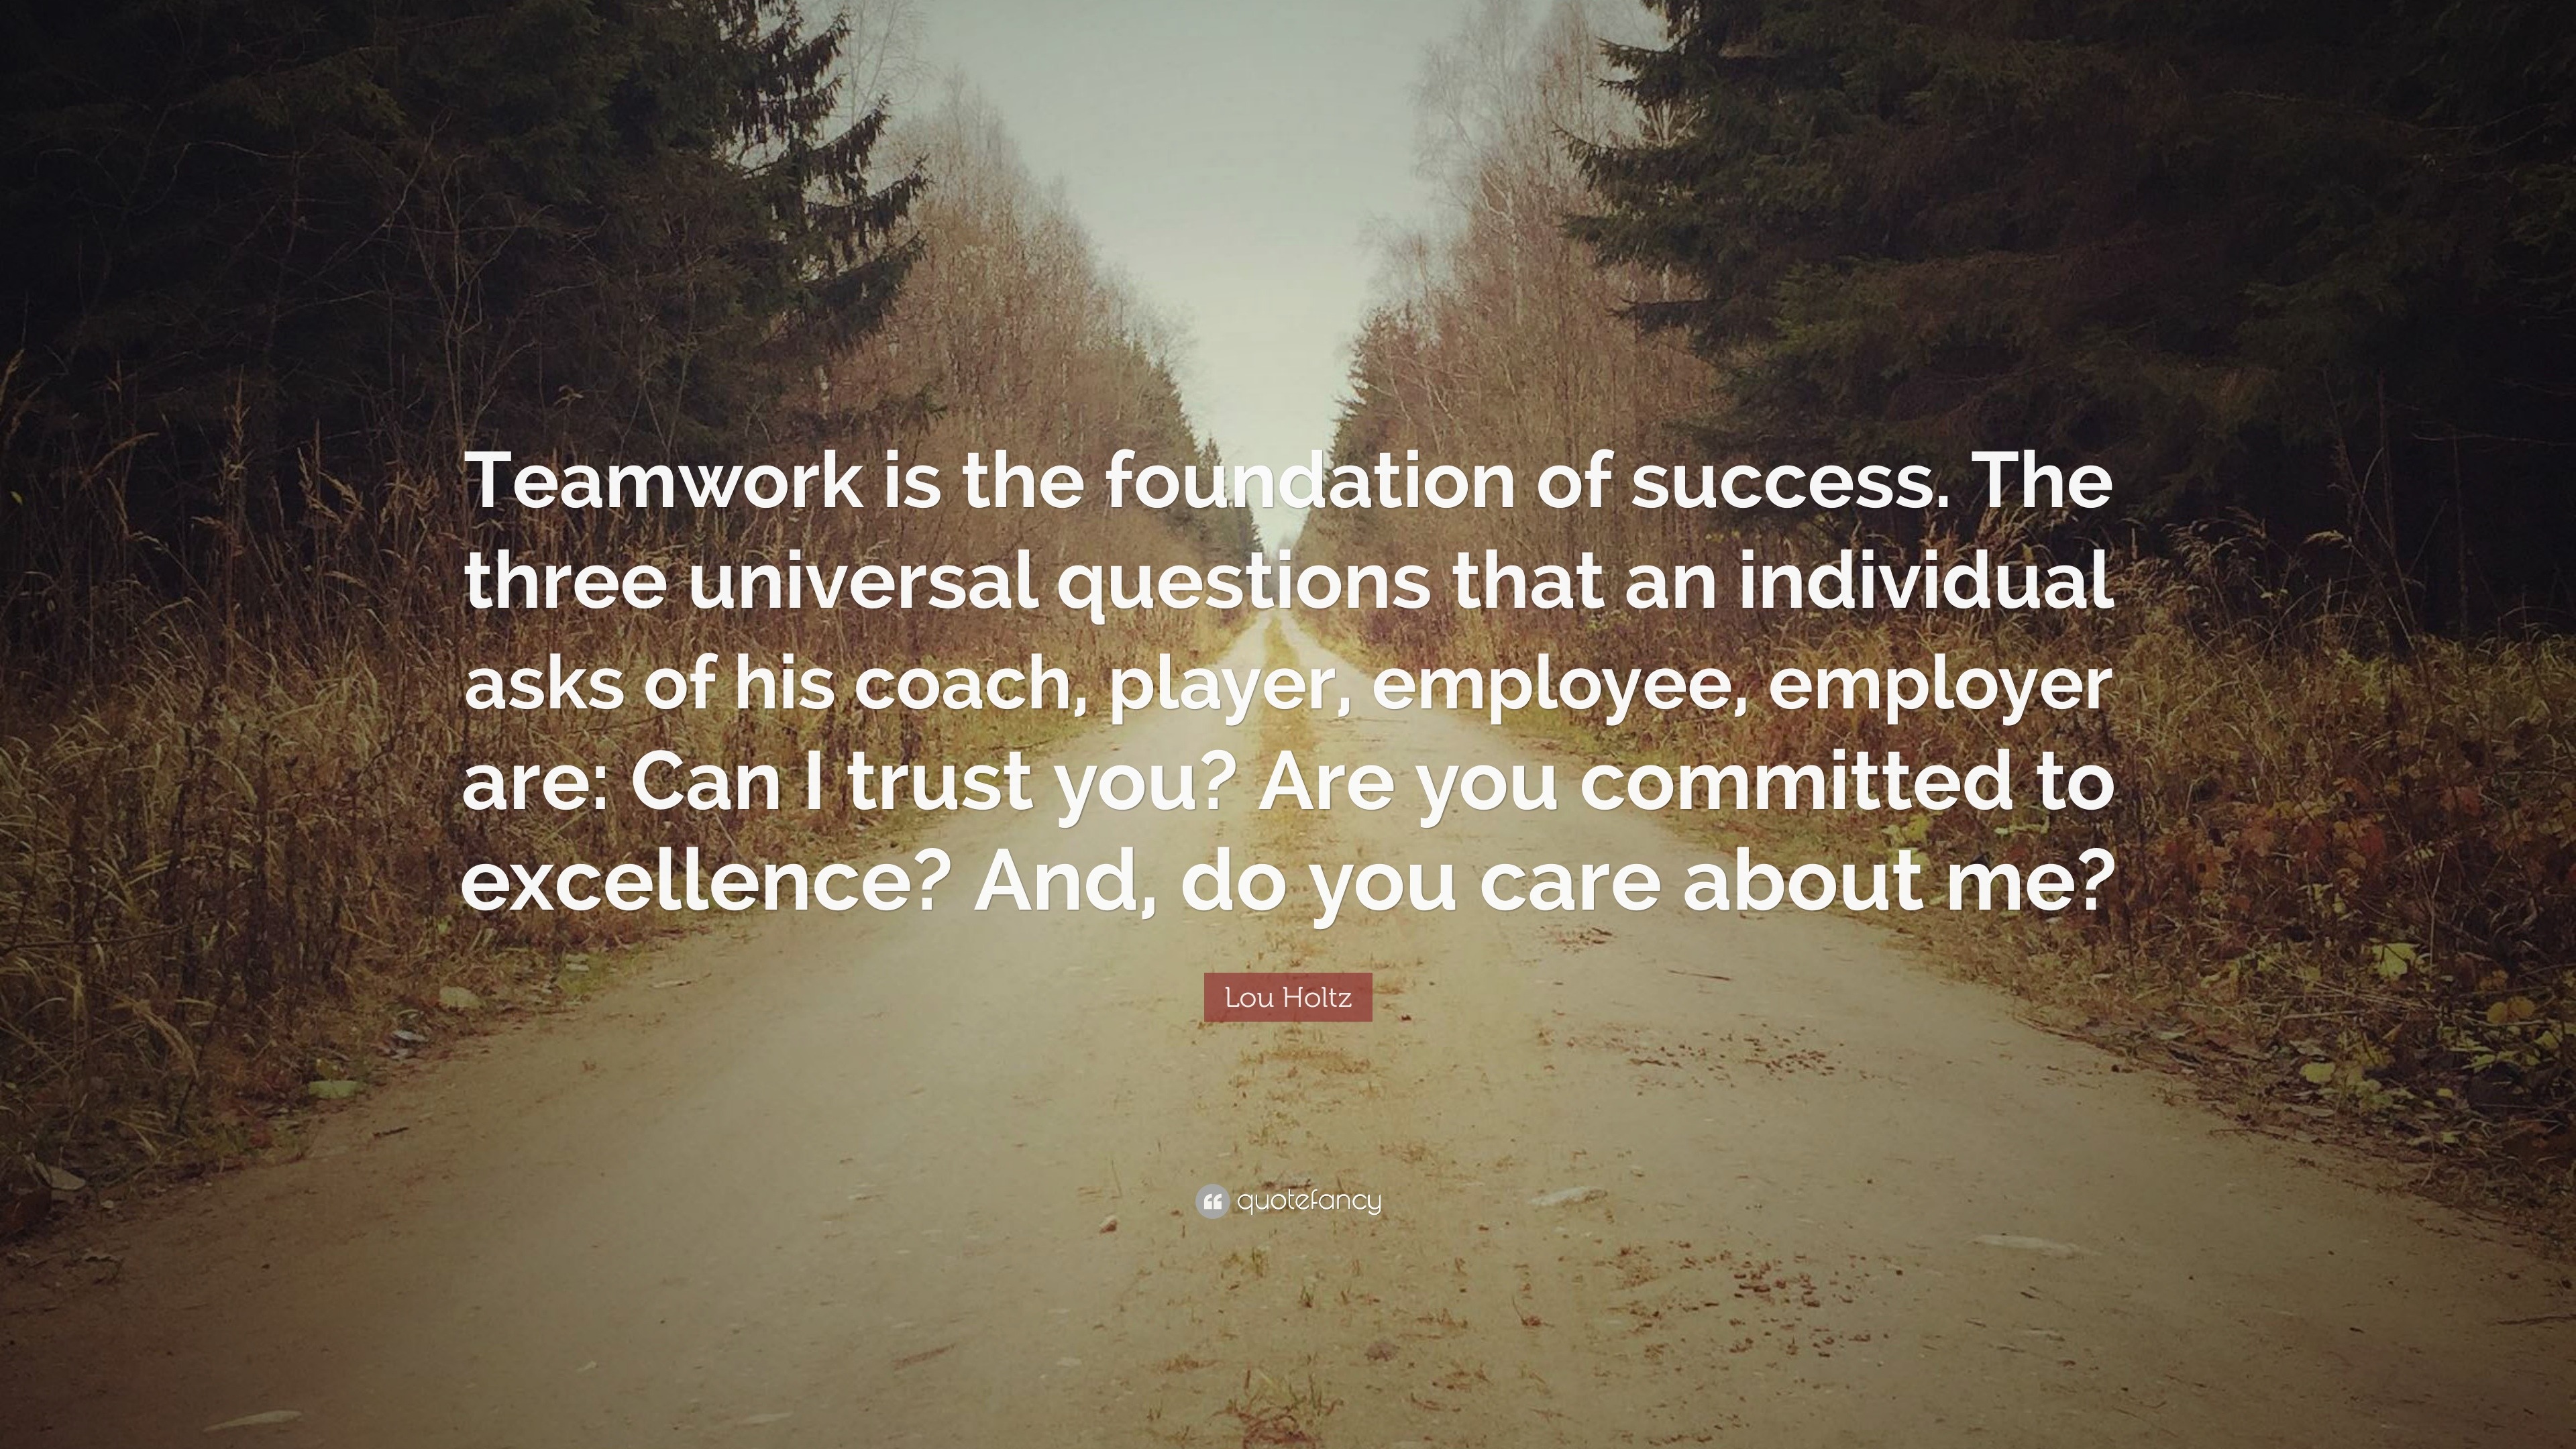 Lou Holtz Quotes On Teamwork - Famous quotes about 'Common Goal ...